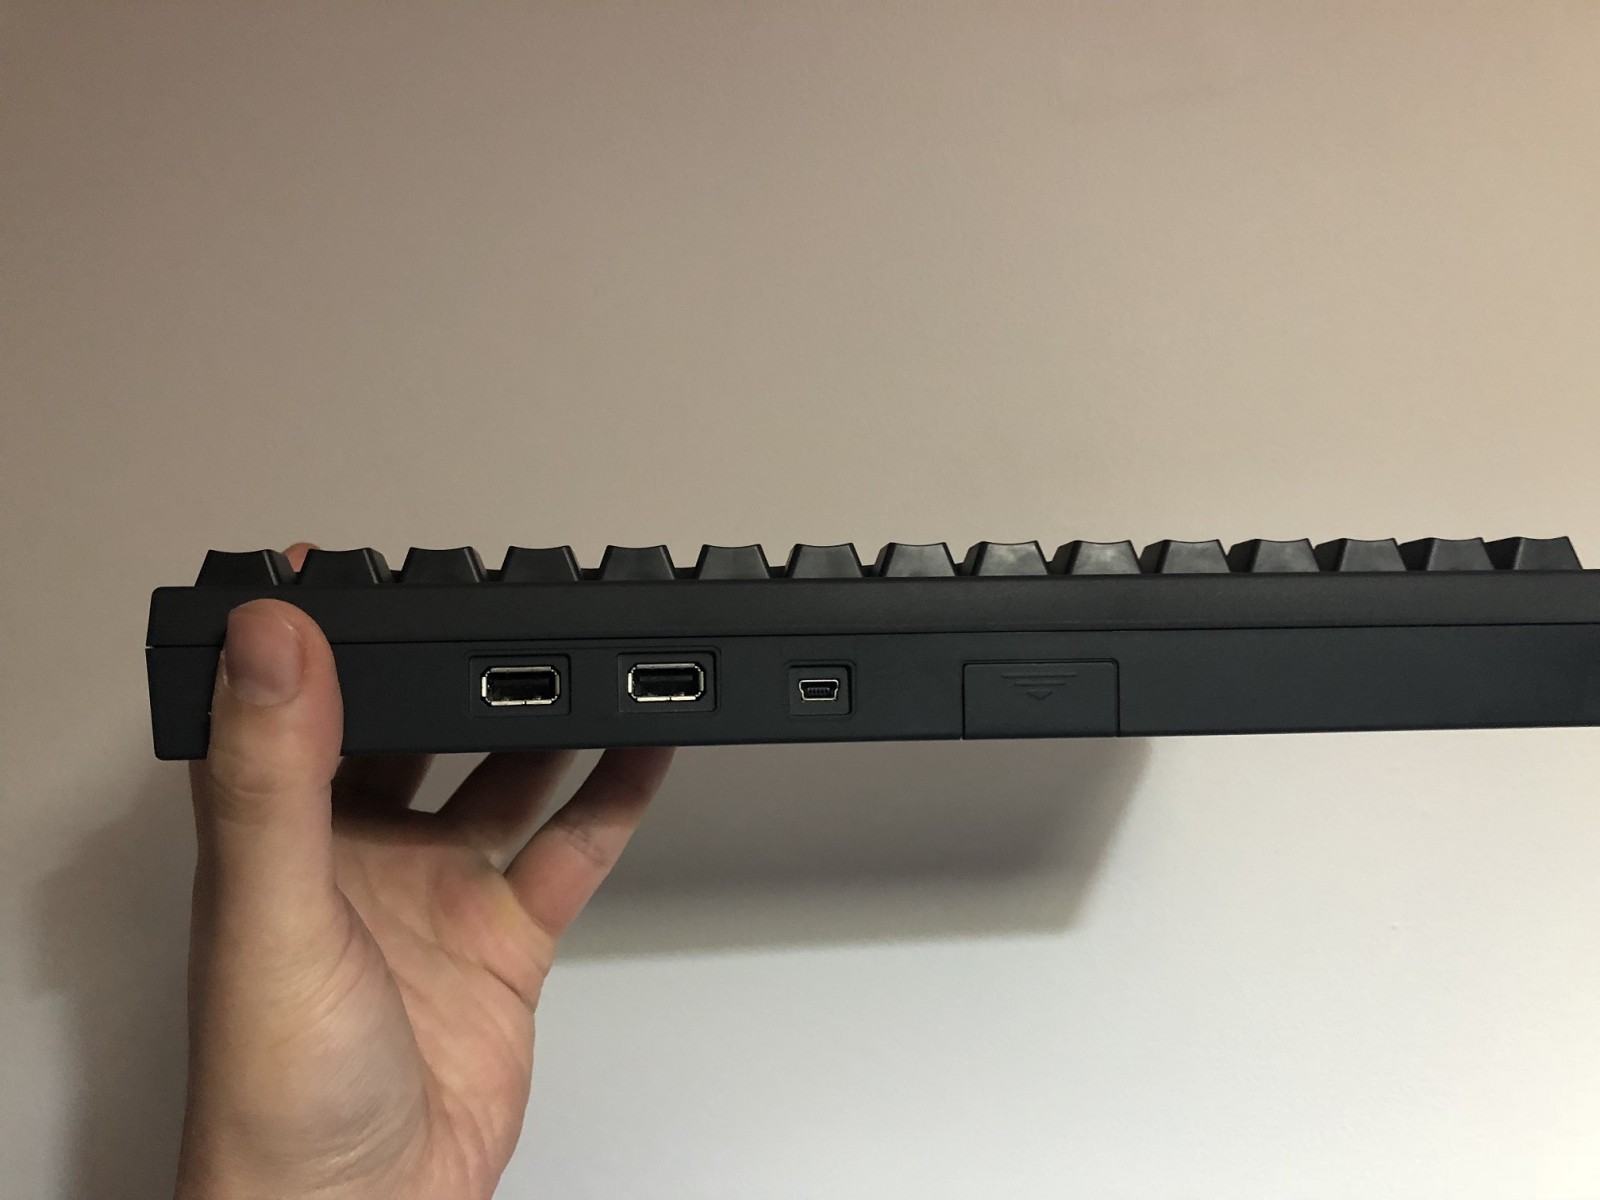 HHKB (Happy Hacking Keyboard) Review and the Key Combinations